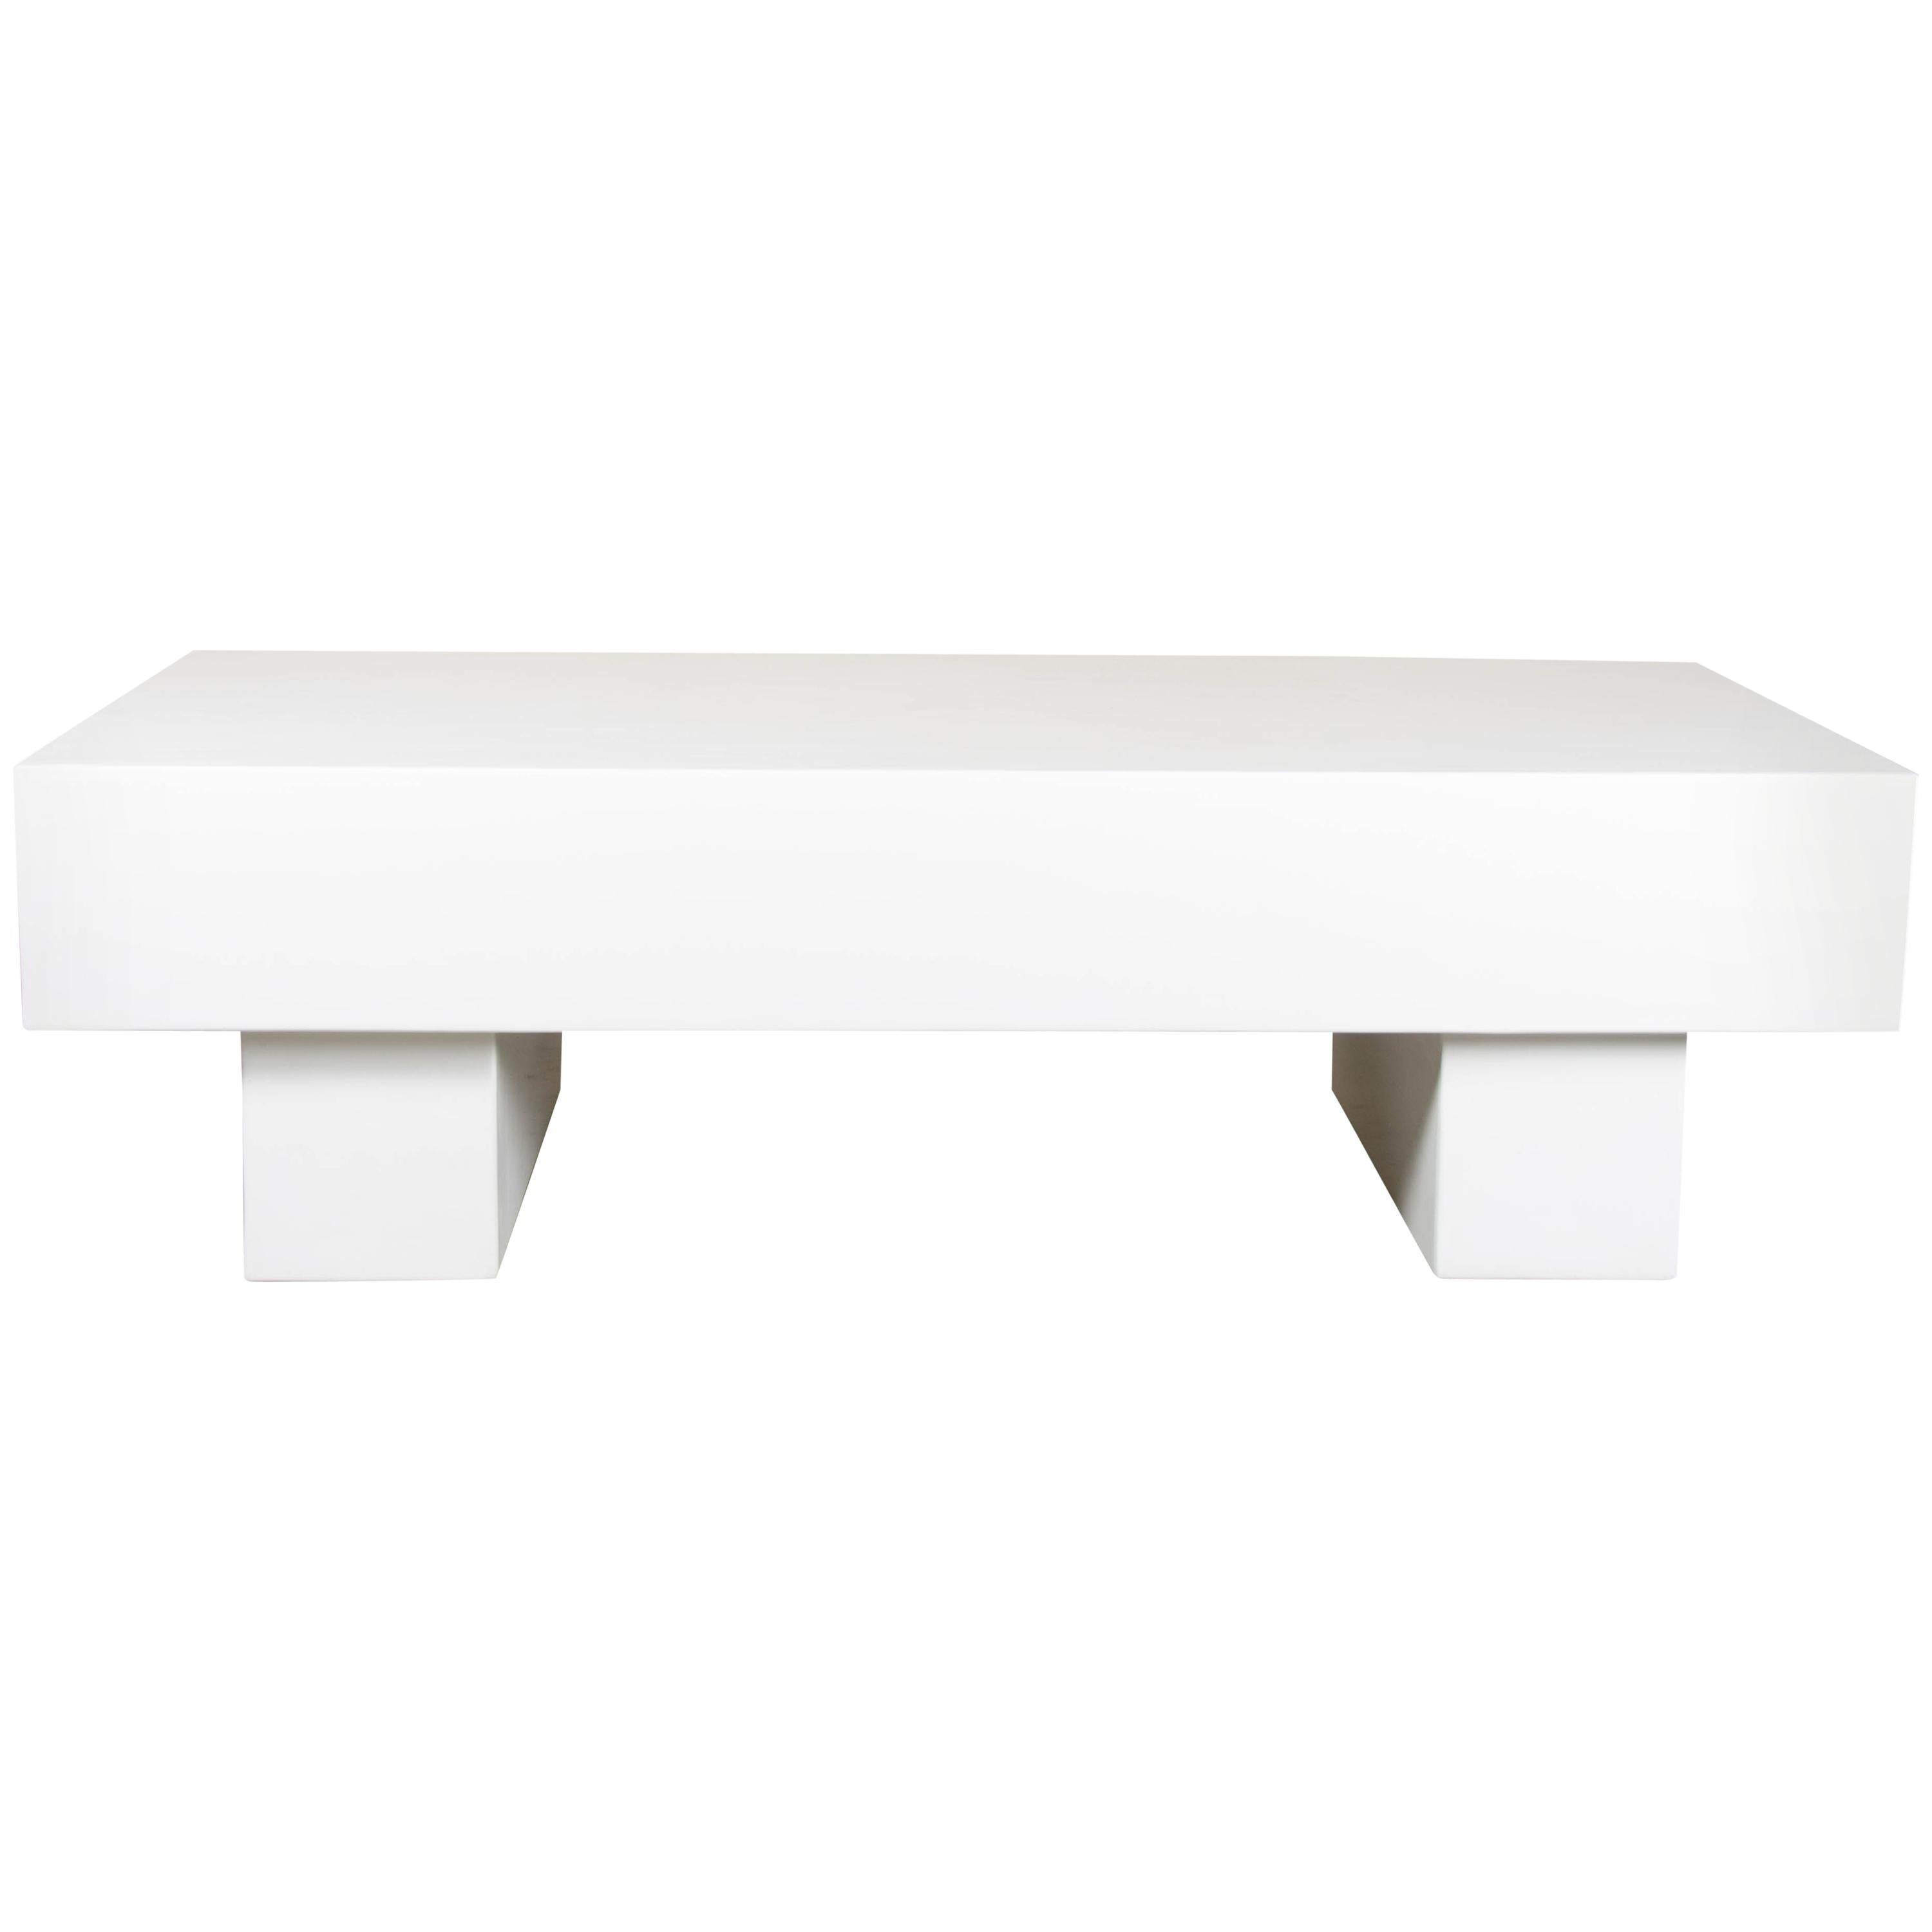 Low "T" Table, Cream Lacquer by Robert Kuo, Limited Edition For Sale